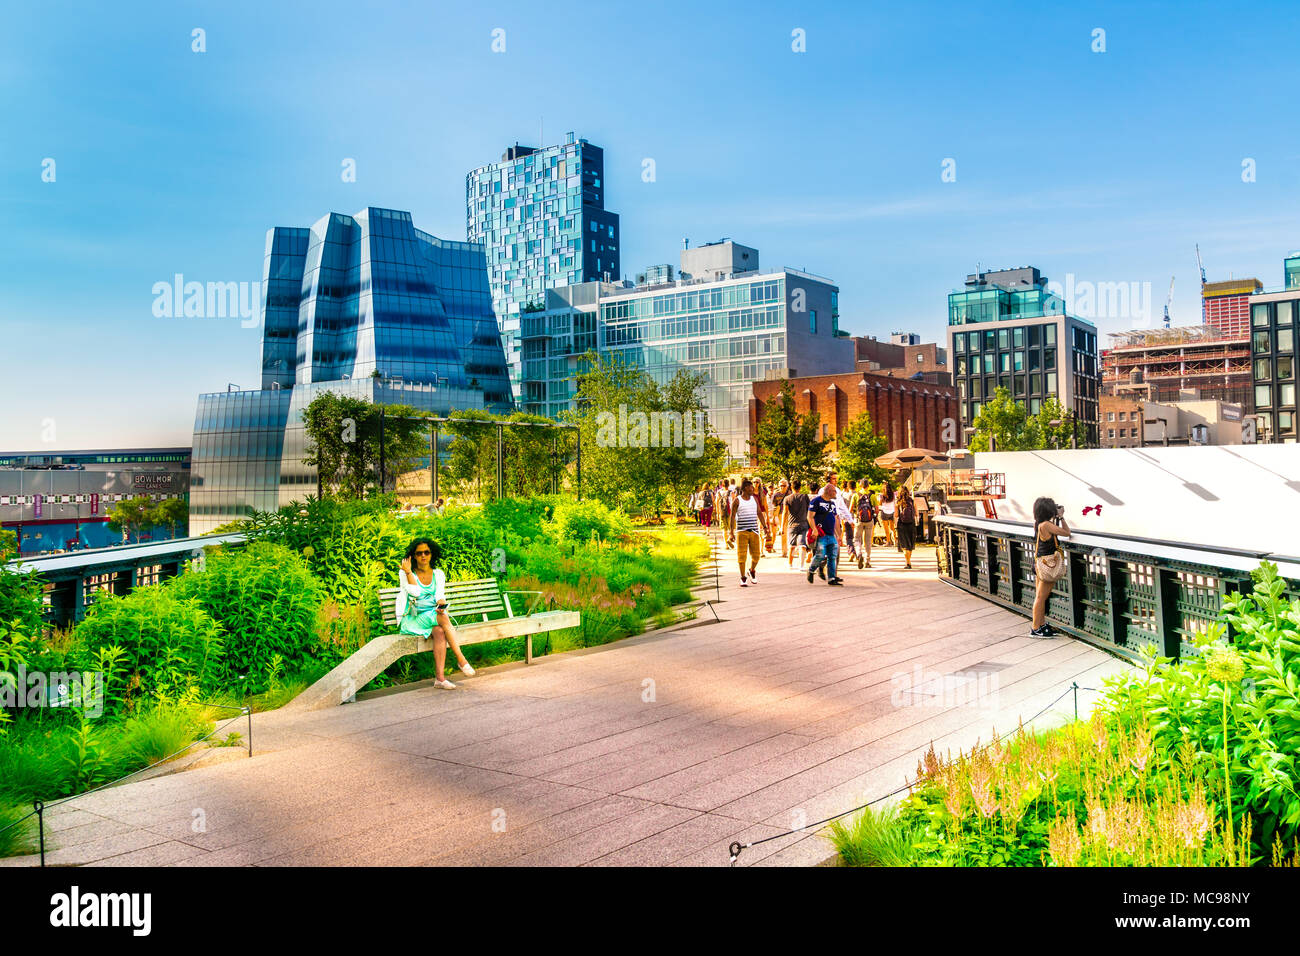 Manhattan, New York City - June 14, 2017: The High Line Park in Manhattan New York. The urban park is popular by locals and tourists built on the elev Stock Photo